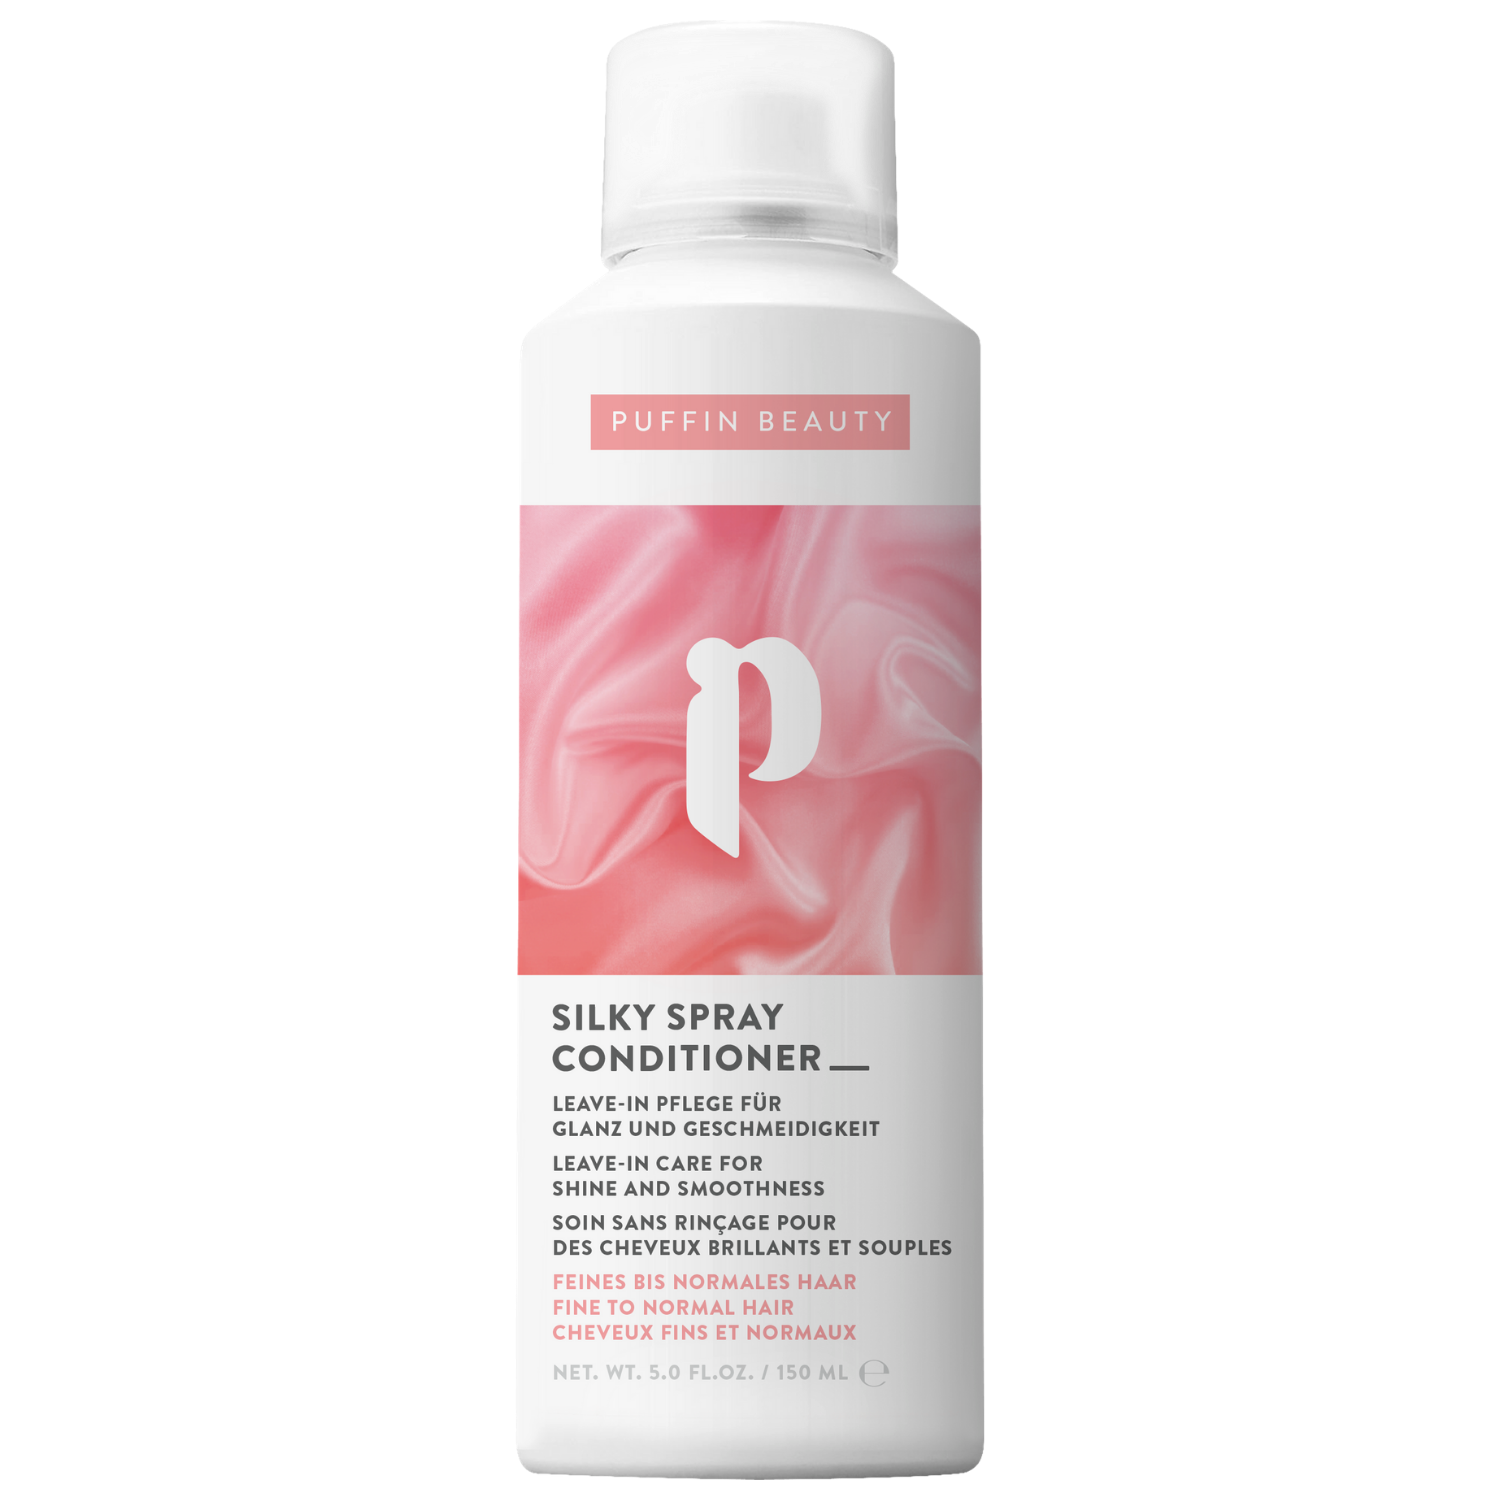 Silky Spray Conditioner Puffin Beauty